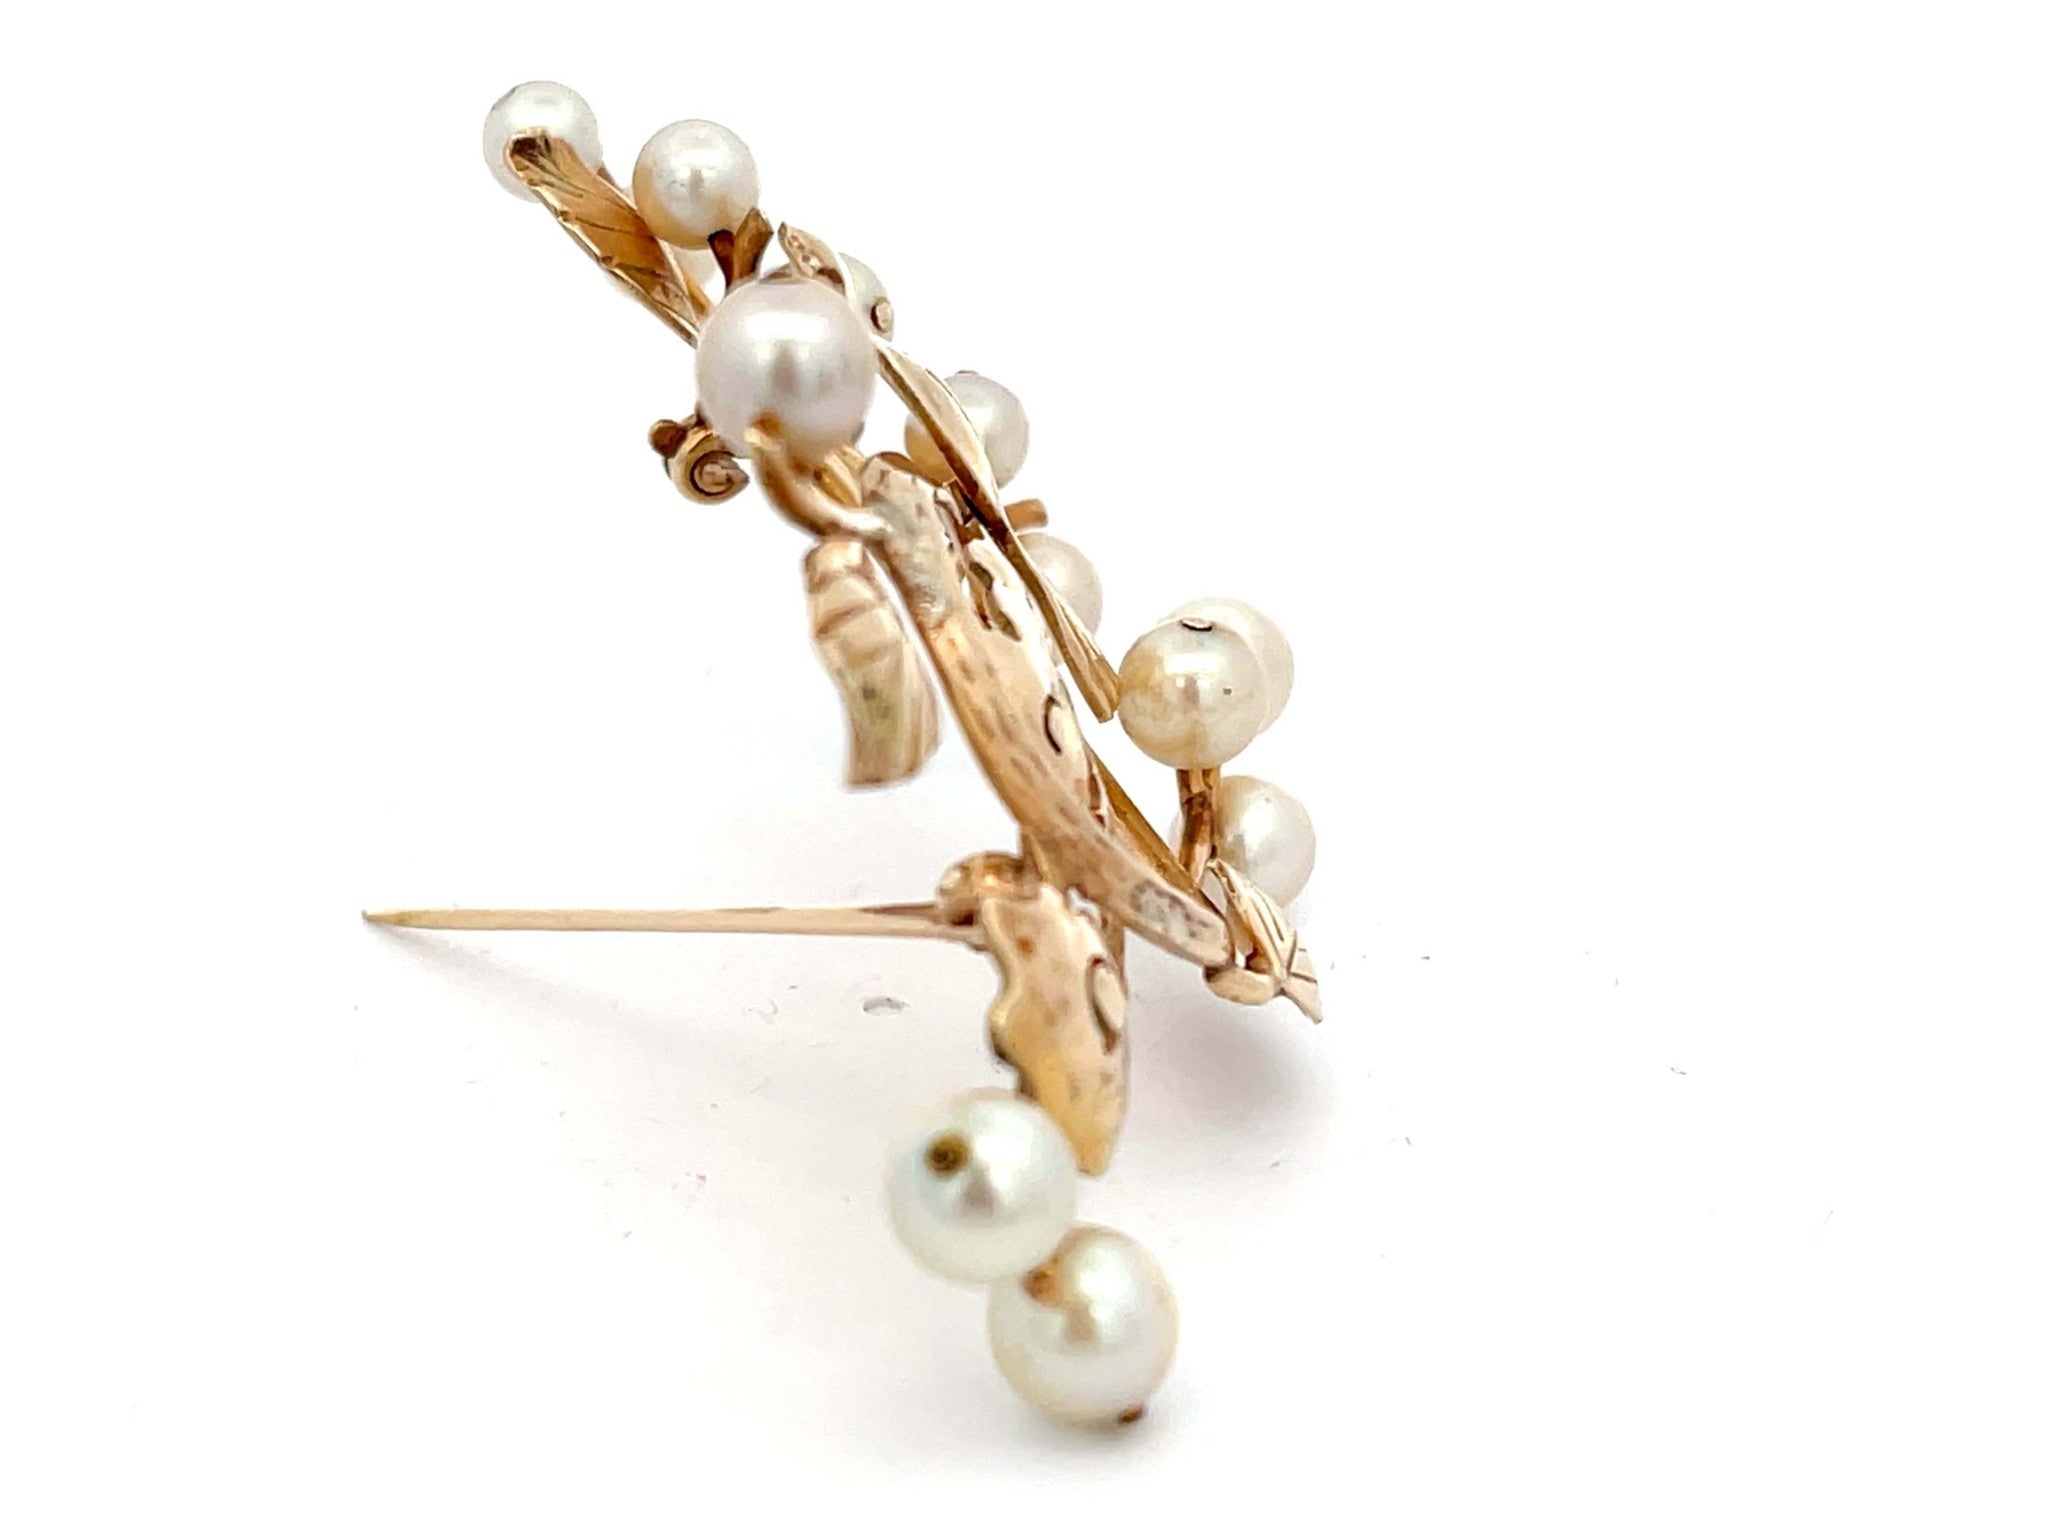 Mings Bird on a Blossom Large Brooch with Pearls in 14k Yellow Gold